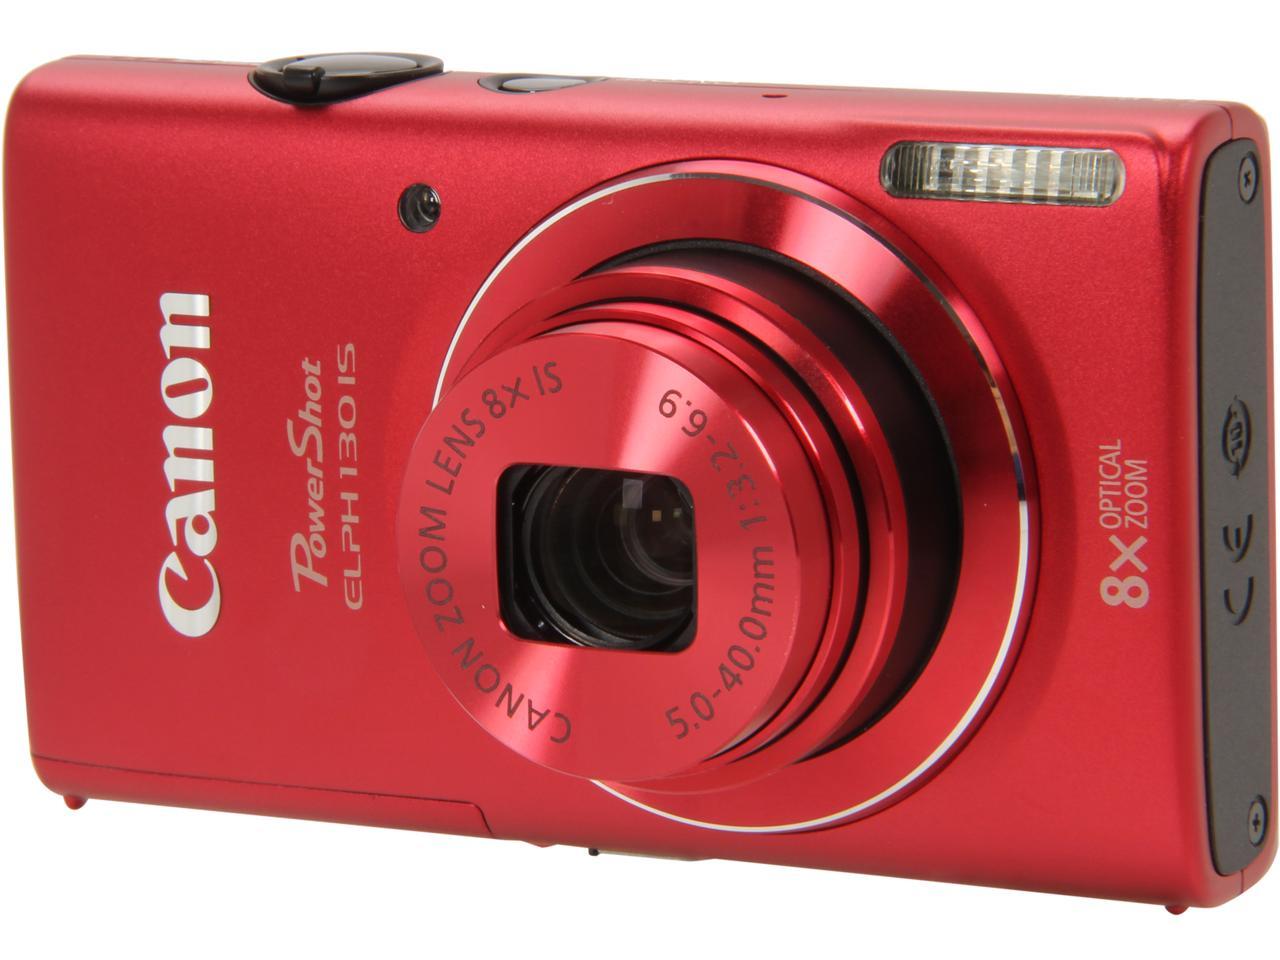 Canon PowerShot ELPH 130 IS Red 16.0 MP 28mm Wide Angle Digital 